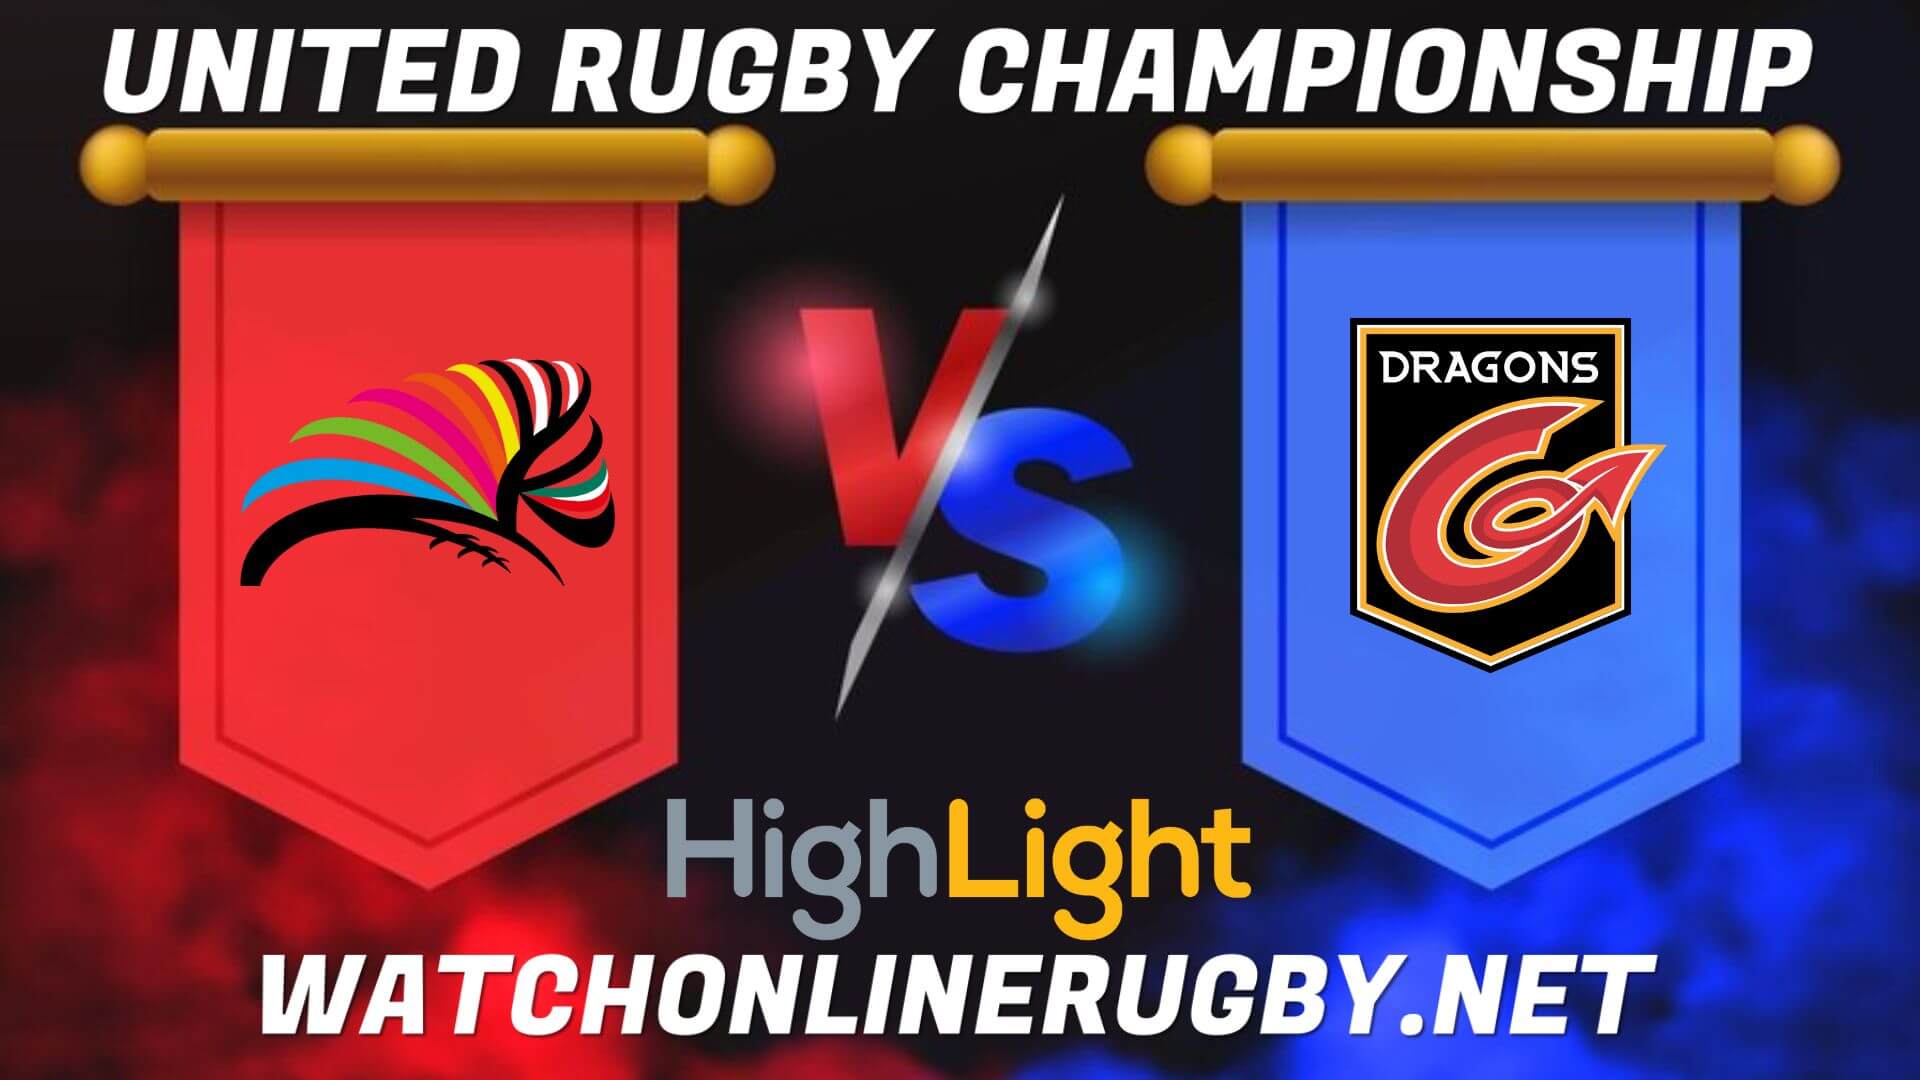 Zebre Vs Dragons United Rugby Championship 2022 RD 17